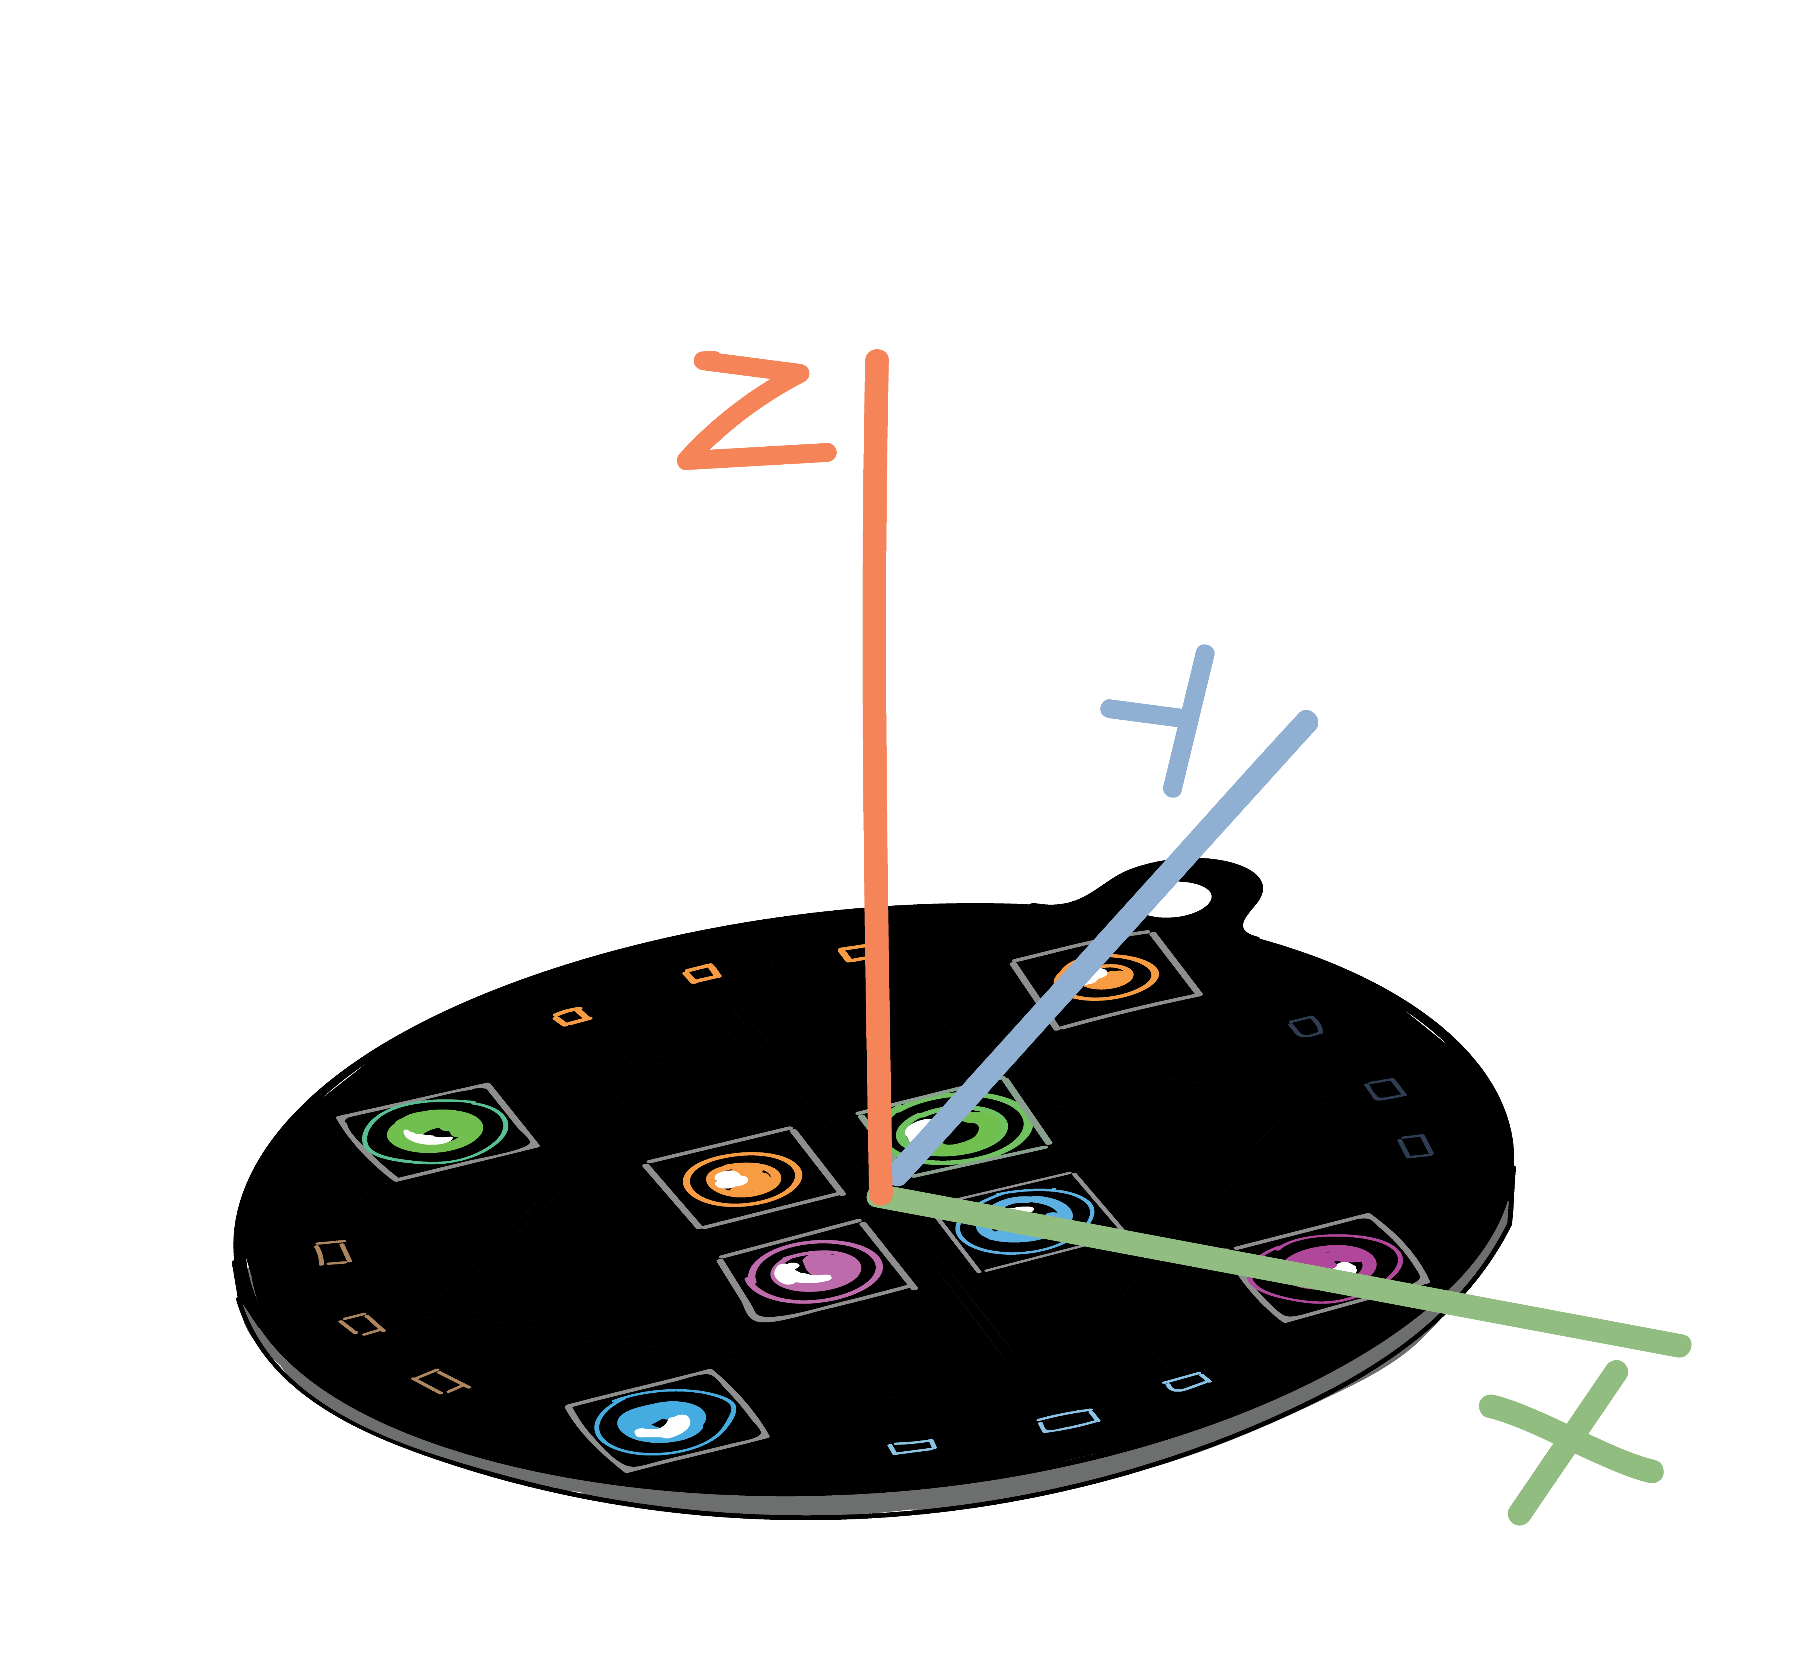 This picture demonstrates the three axes that the SpinWheel can detect acceleration along. For instance, if you have the SpinWheel resting flat on the table and pick it up, the SpinWheel’s acceleration sensor will detect acceleration only along the z axis. More complicated motions will have an x, y, and z axis component. image credit Mariya Krastanova